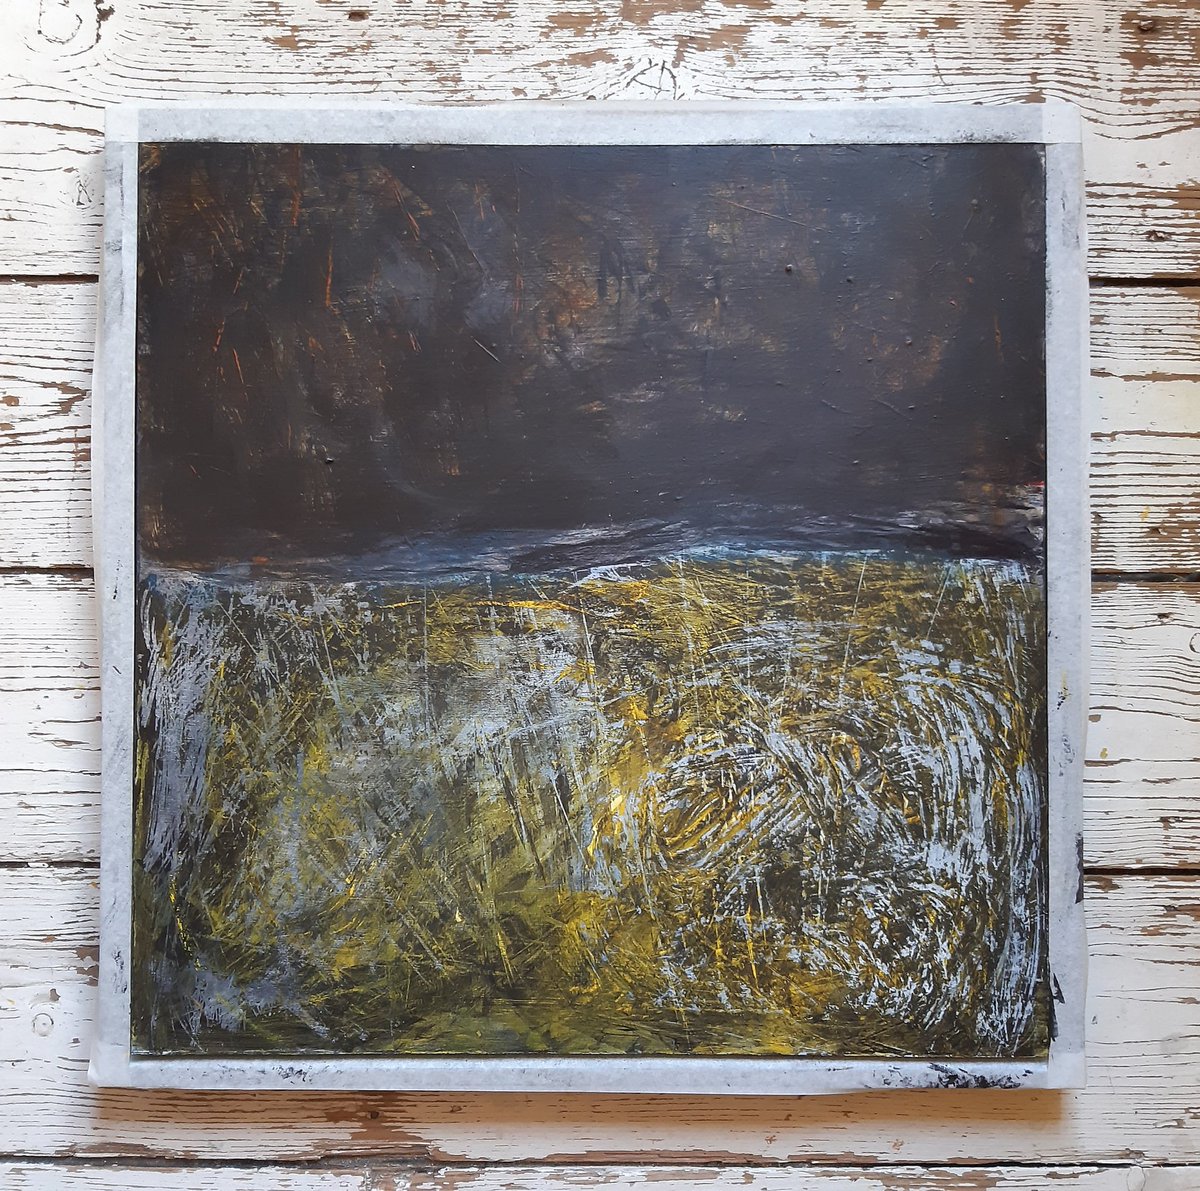 Messing around with an 'old' painting I didn't totally like. Sanded, turned upside-down, threw paint down, rubbed it in, wiped it off, scratched about abit. Now I'm liking alot of what I see. All sorts of stuff on a 50x50cm cradled wood panel, still in it's black tray frame.